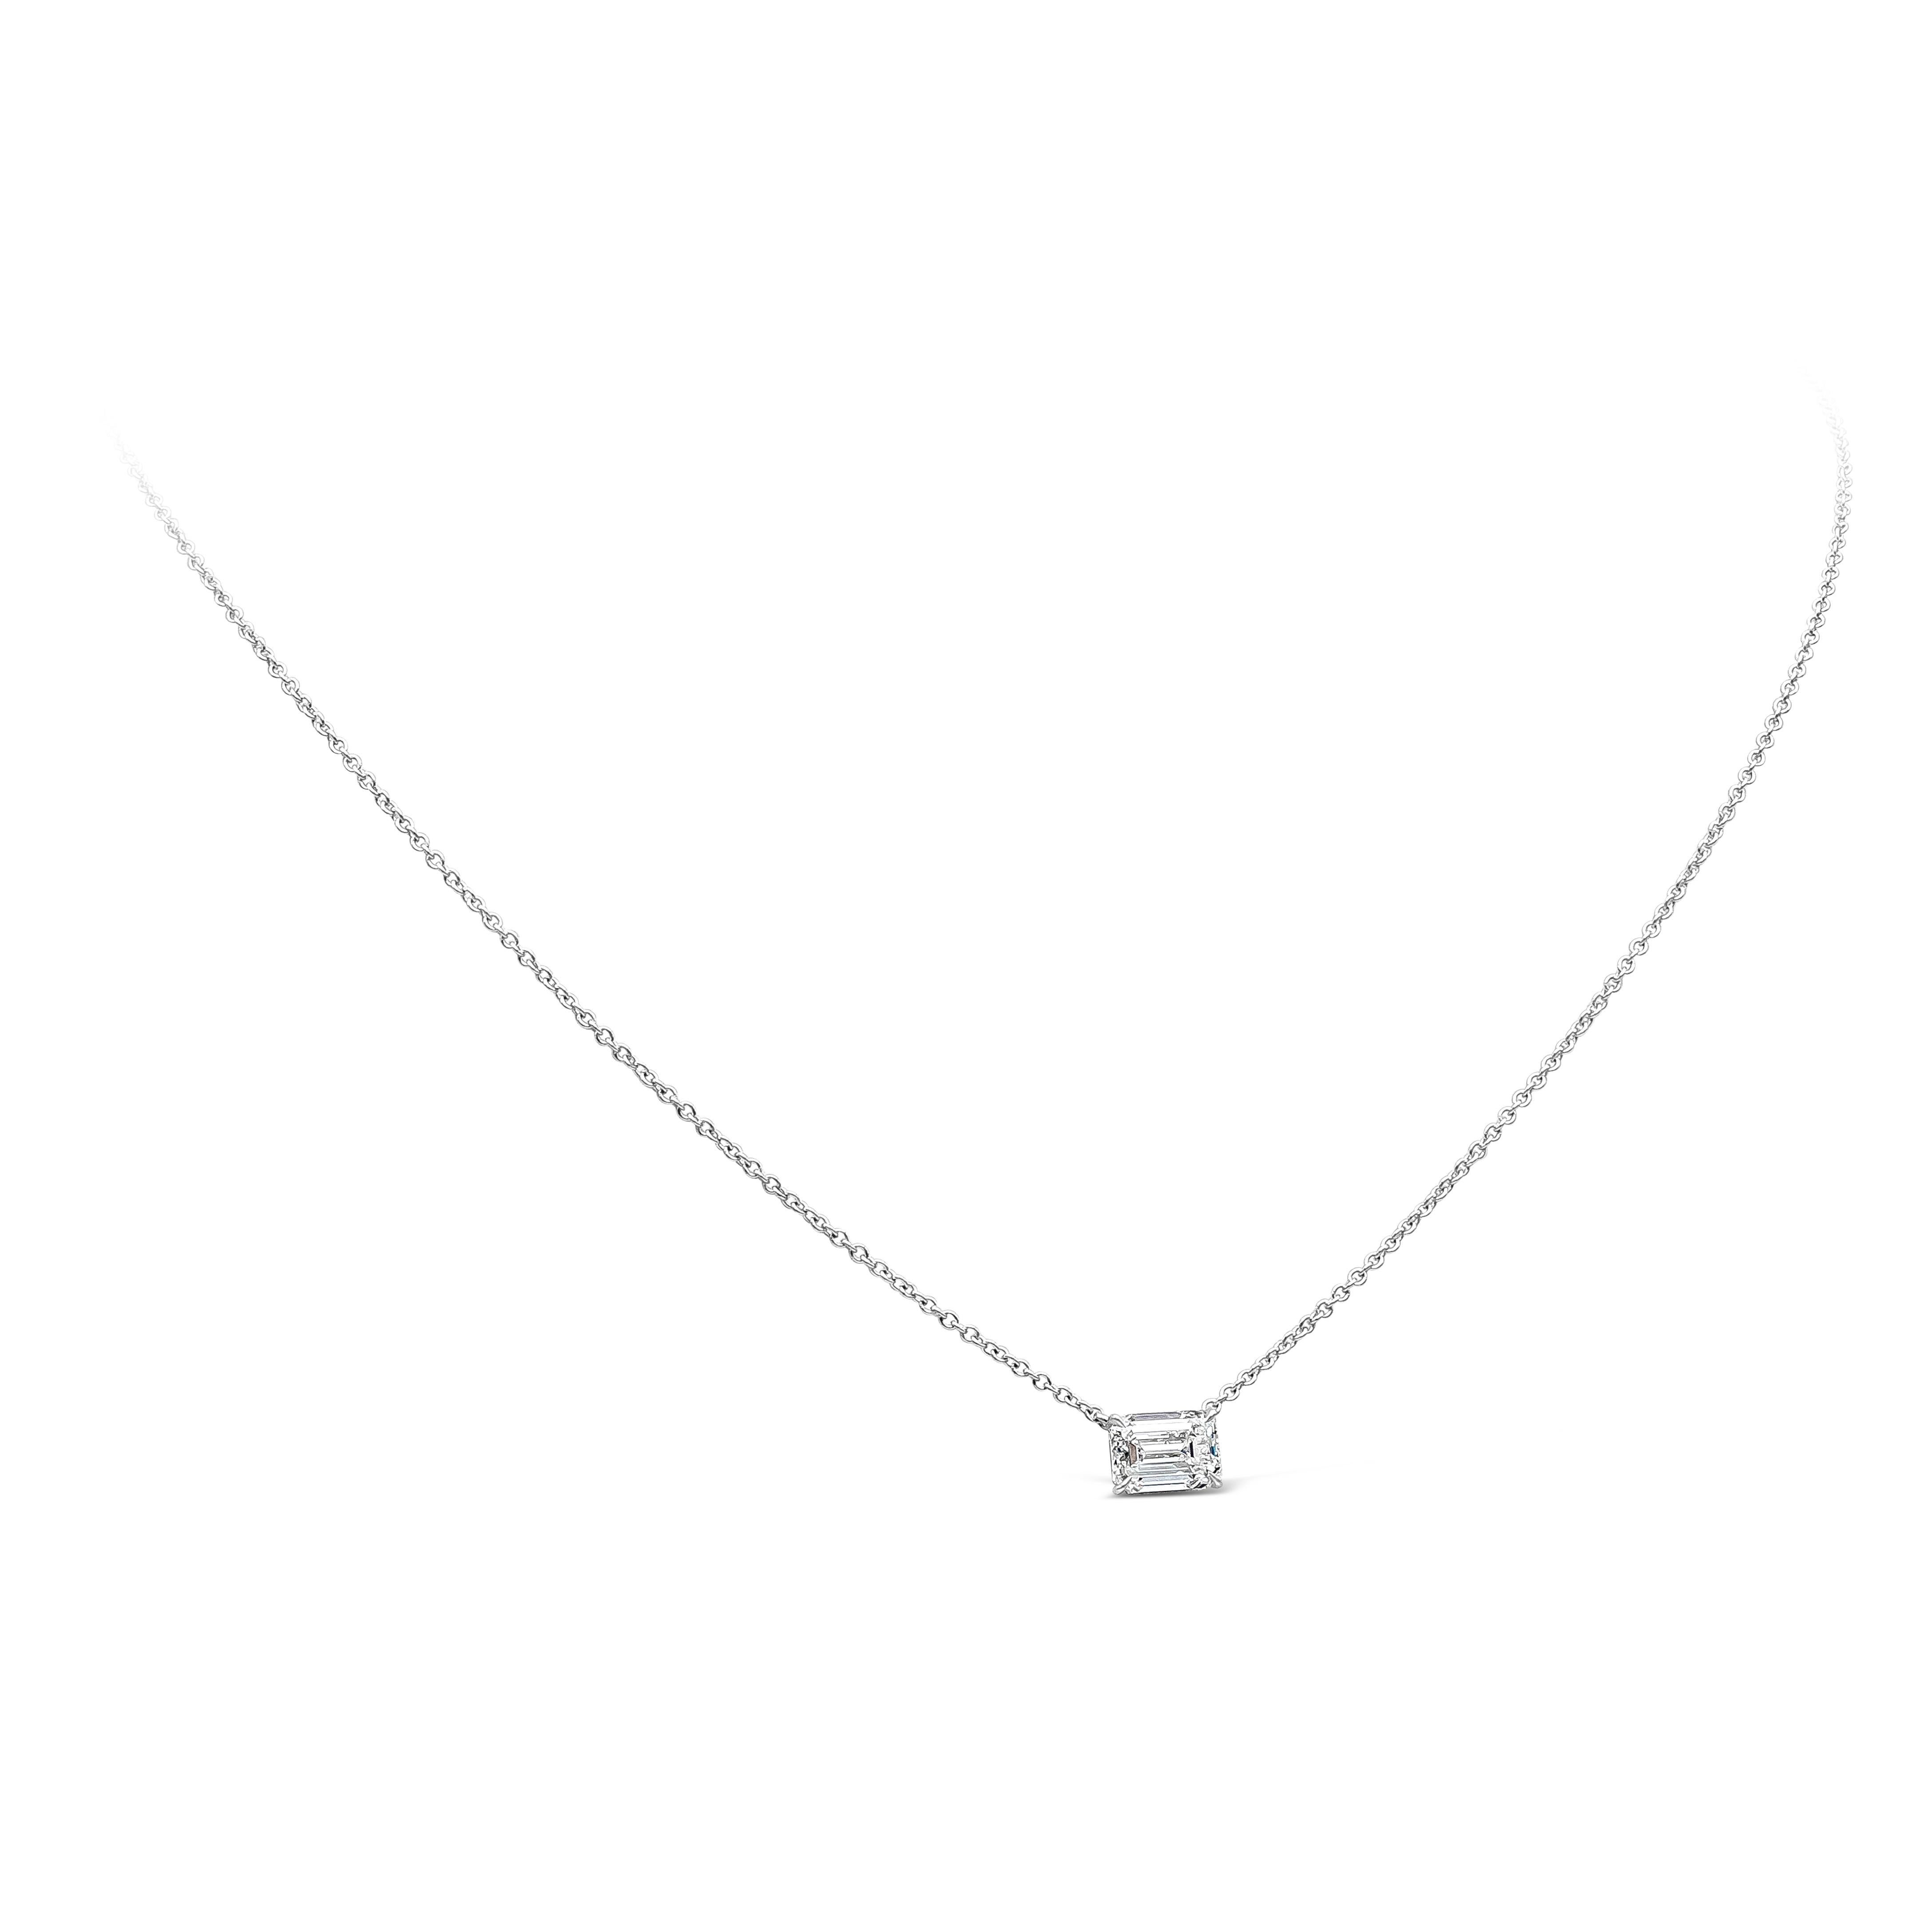 A simple and versatile pendant necklace featuring a solitaire GIA Certified 1.50 carat emerald cut diamond, H Color and SI in Clarity.  Set horizontally, in an everlasting 18K white gold basket, attached to a 18 inch white gold chain. 

Roman